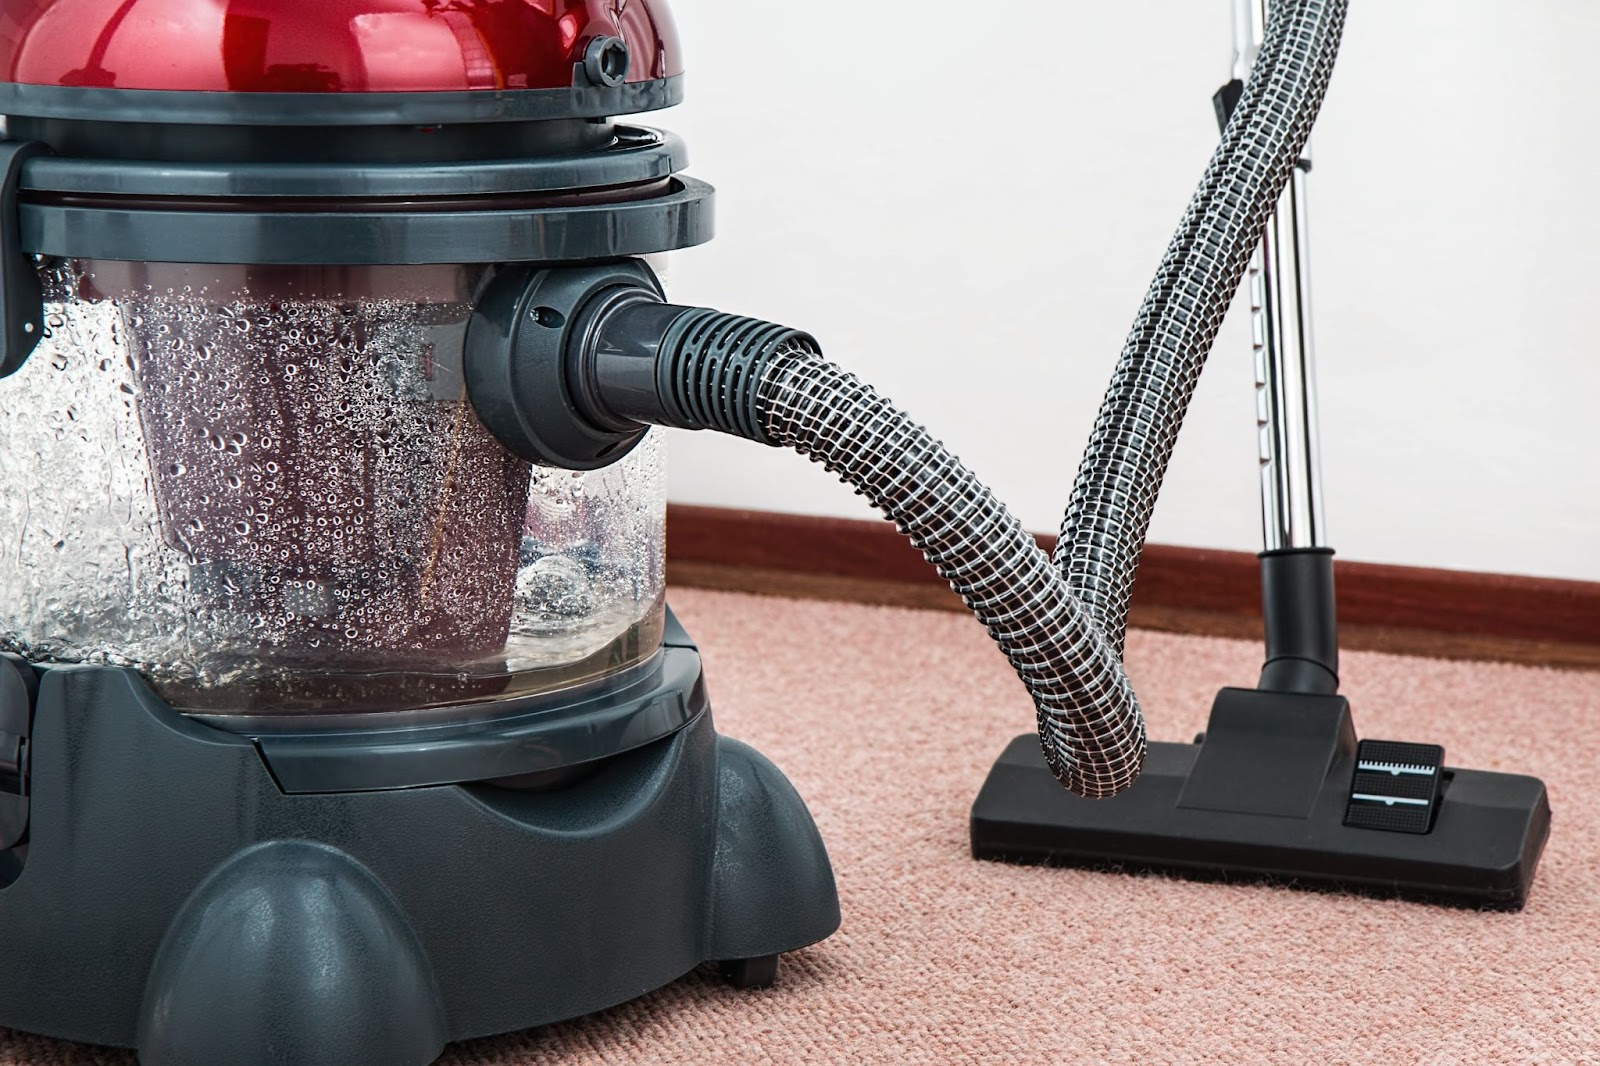 A carpet vacuum cleaner loosens dirt from the carpet before suctioning it away.